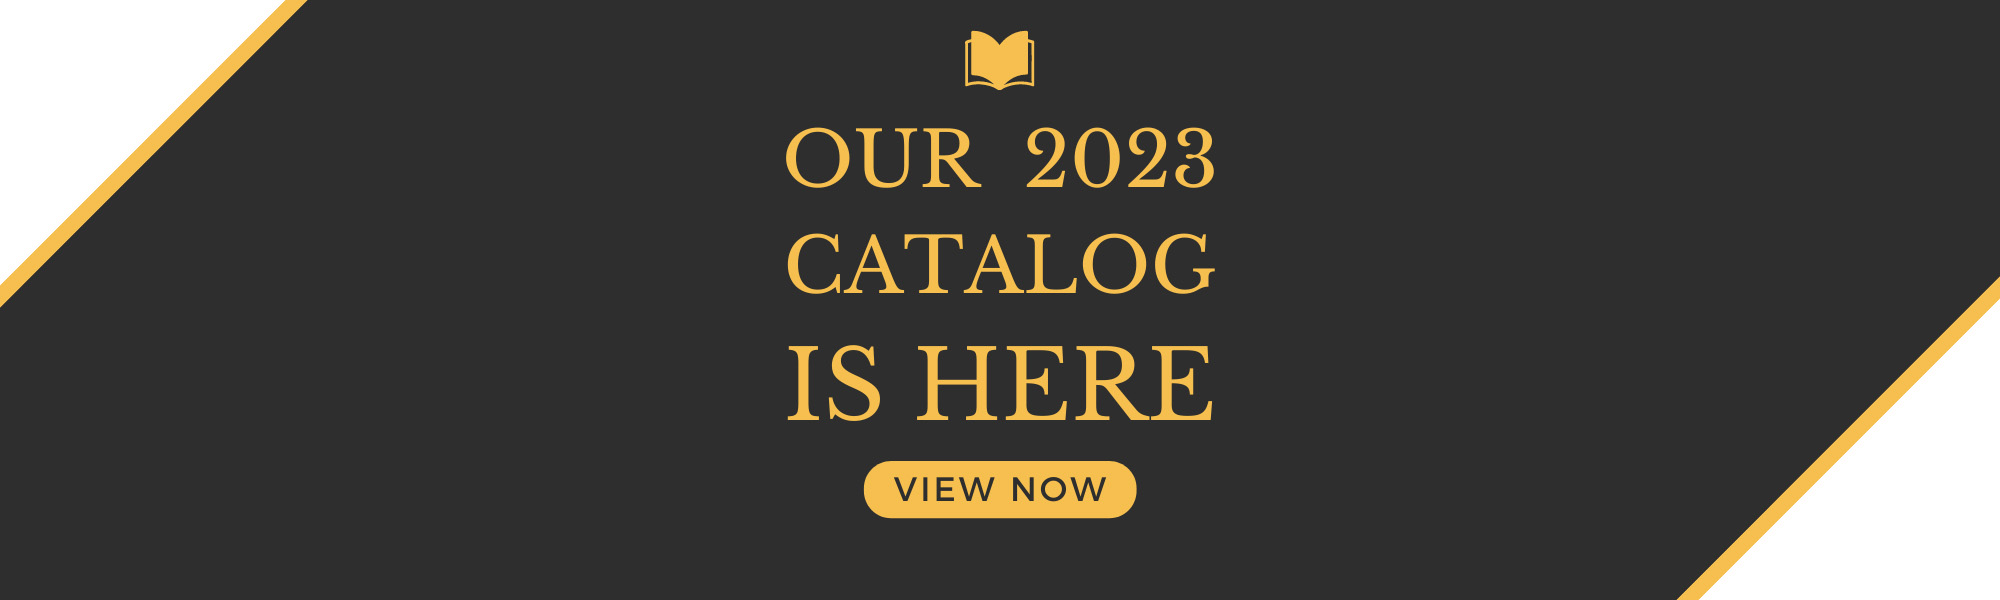 Our 2023 catalog is here.